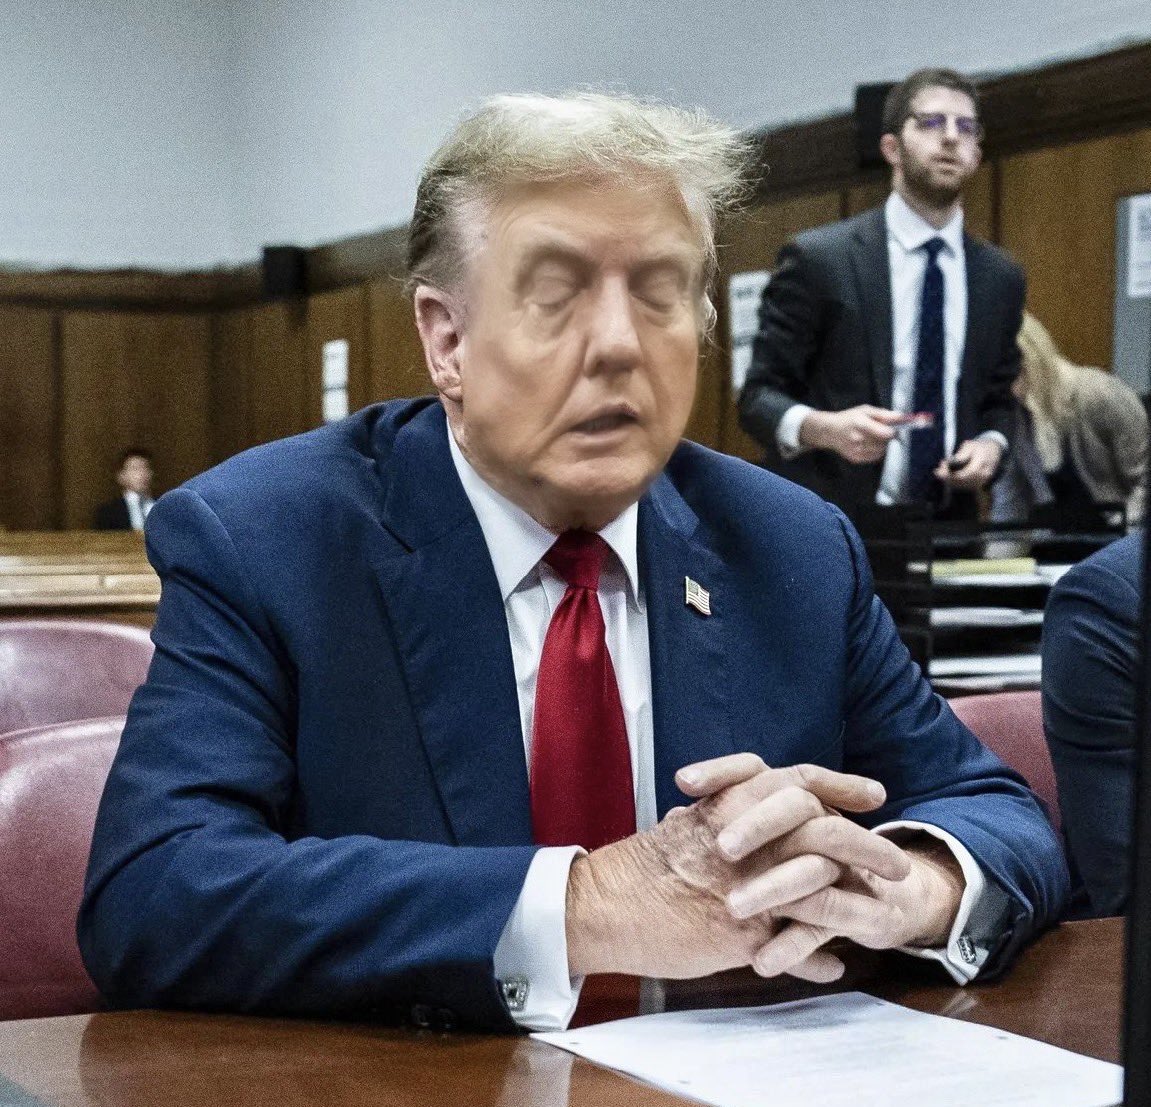 What do you think Trump is dreaming about right now at his criminal trial? 😴 #SleepyDon